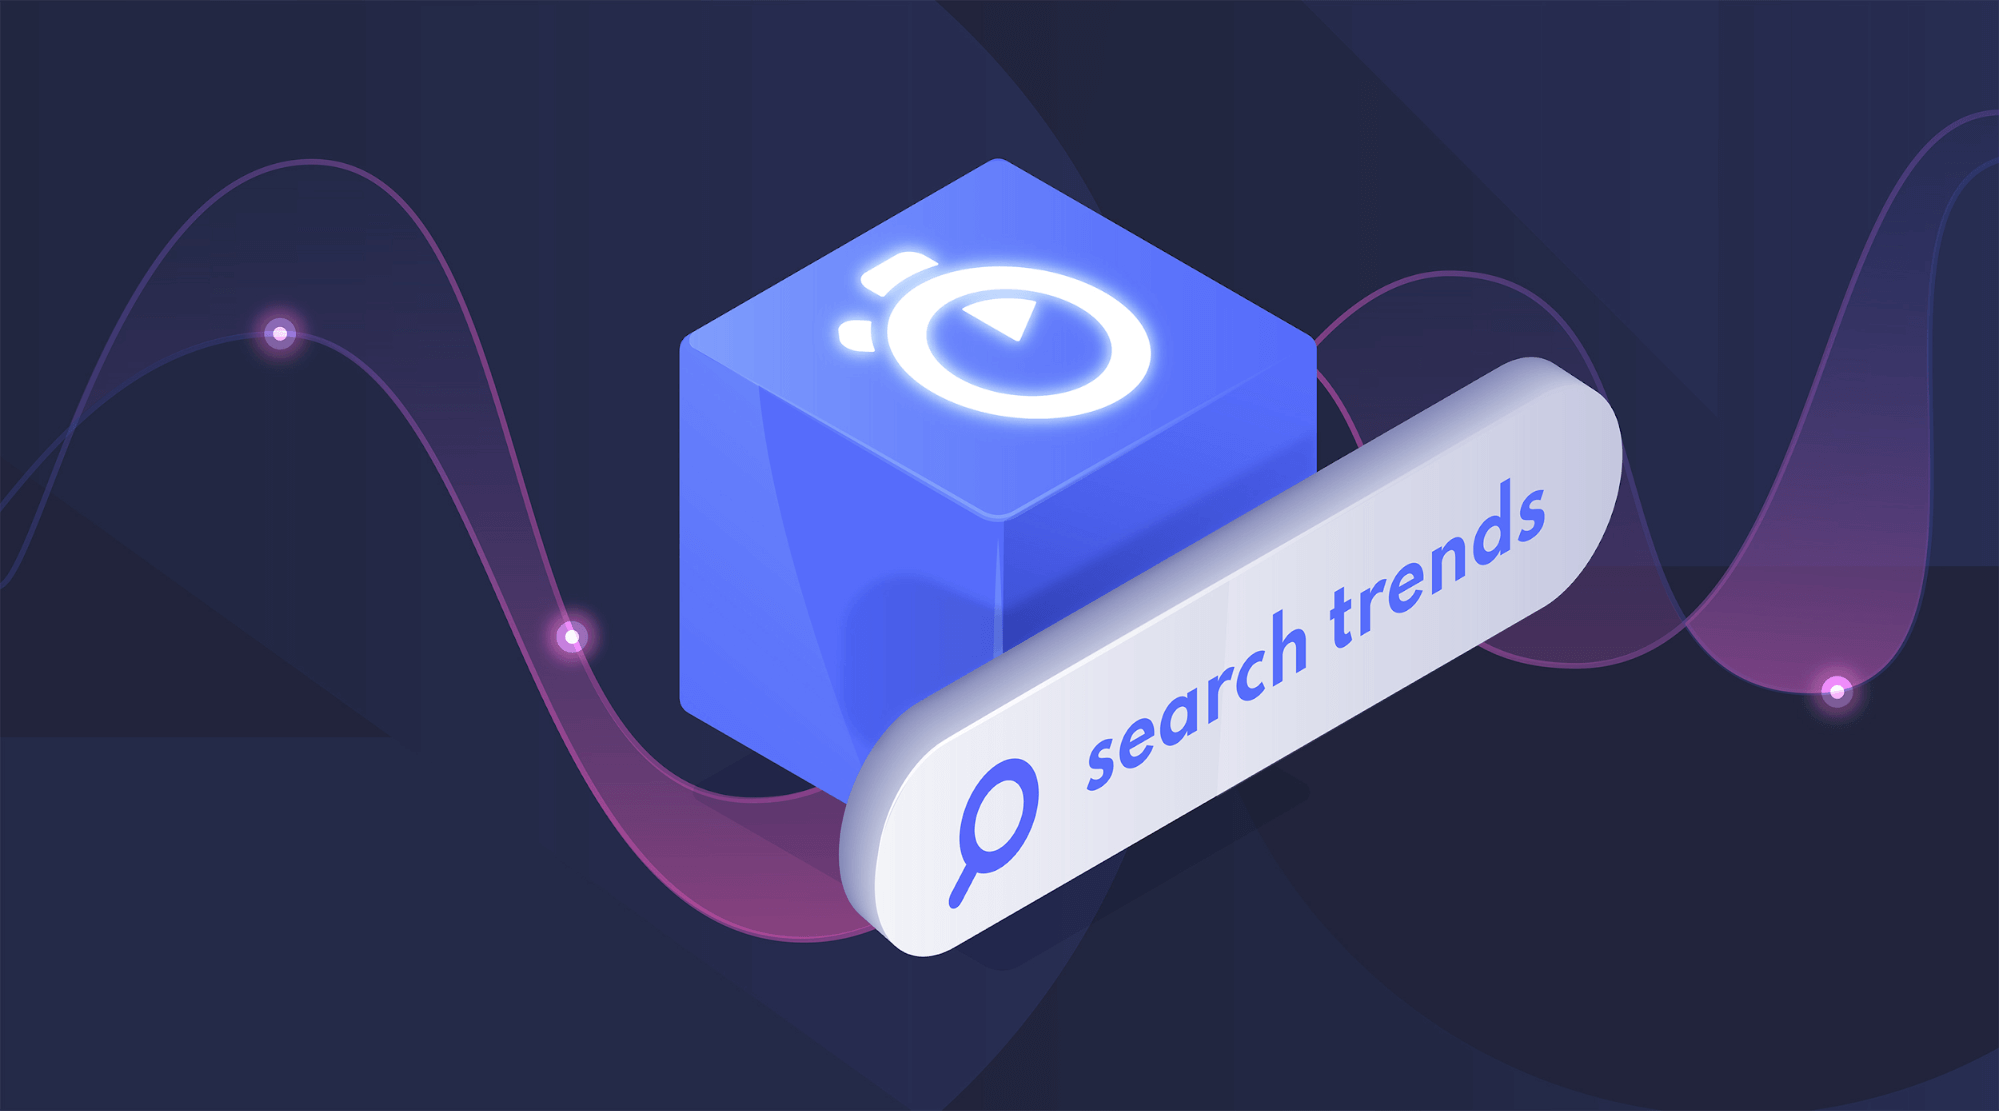 Algolia insights: Q1 2020 search trends – A time of global disruption